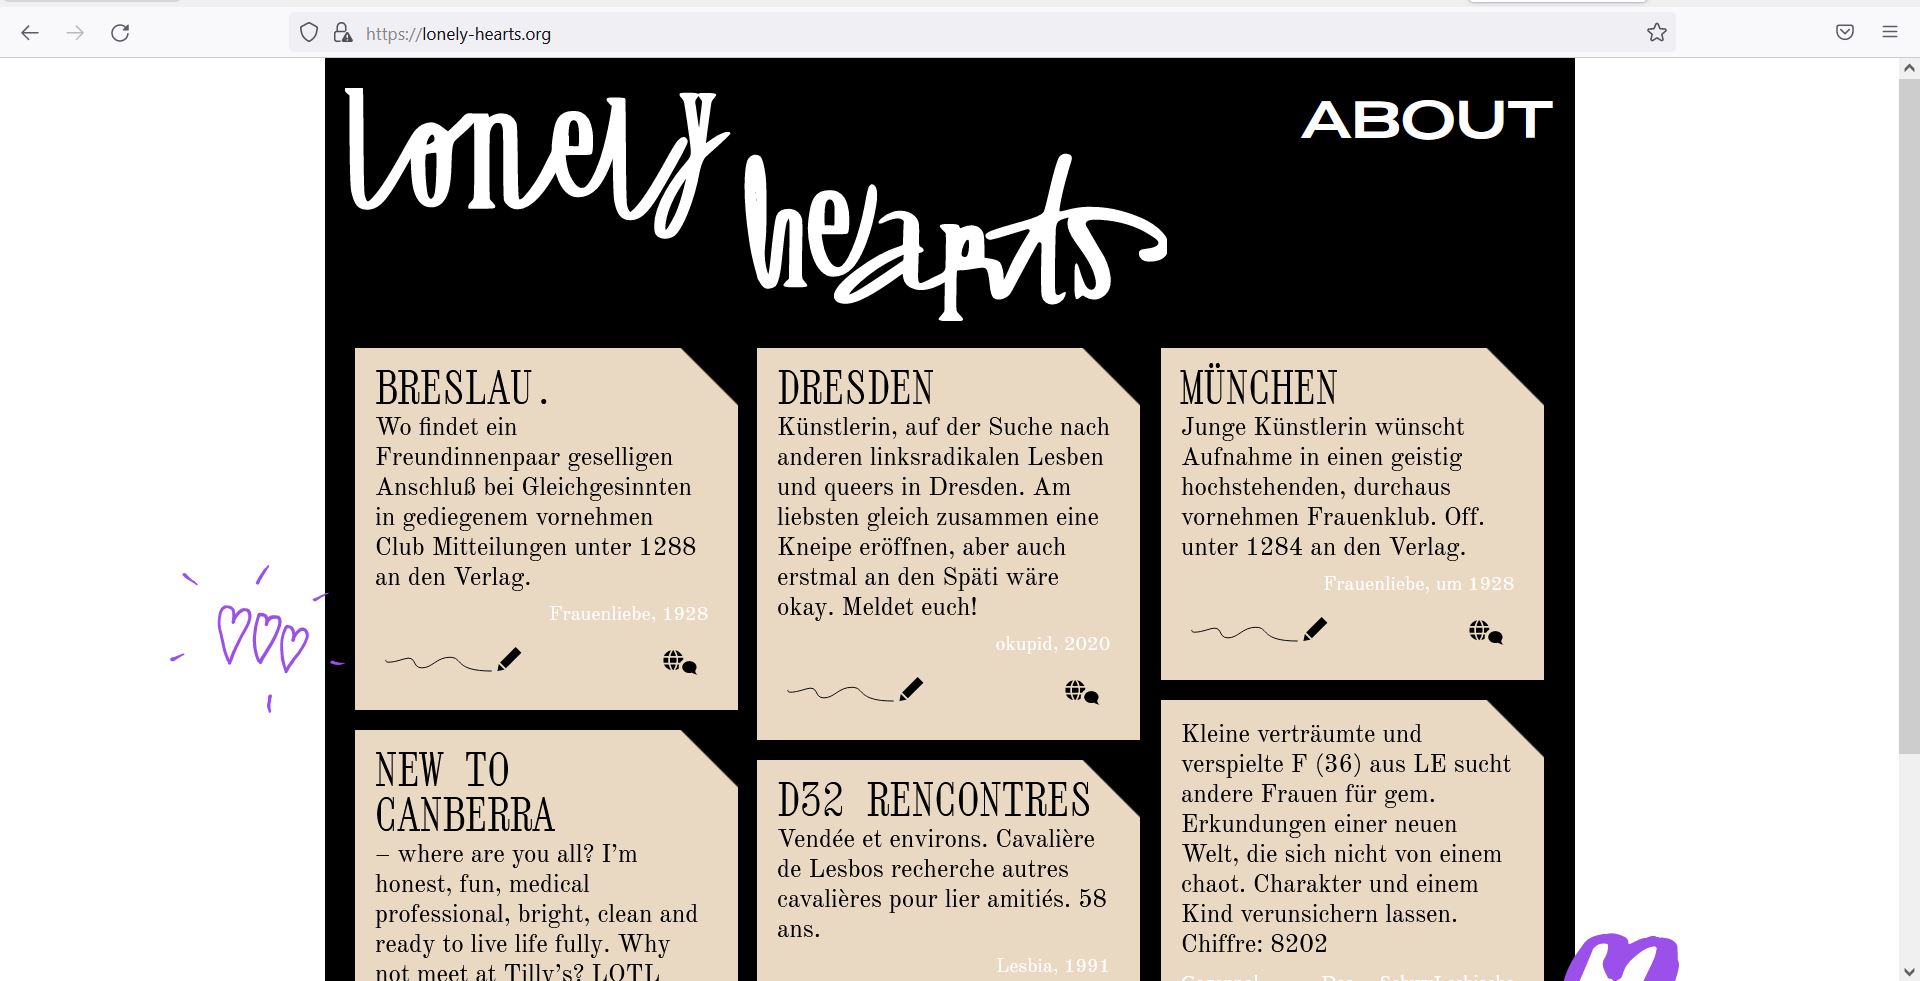 Landscape screenshot of a browser window of the website lonely-hearts.org. On a black background, "lonely hearts" in curved letters at the top, "About" at the top right. Six beige rectangles are arranged in rows, the bottom row cropped. The top right corner of each is cut off and on all of them is black text, each representing a personals ad. The first three texts are as follows: Wroclaw. Where can a pair of girlfriends find a sociable connection with like-minded people in a dignified, elegant club? Please call the publisher at 1288. Women's love, 1928 Dresden Artist, looking for other radical left lesbians and queers in Dresden. Preferably we would like to open a pub together, but it would also be okay to go to the Späti for a while. Get in touch! okupid, 2020 Munich Young artist would like to join an intellectually sophisticated, thoroughly distinguished women's club. Off. under 1284 to the publisher. Frauenliebe, around 1928 Below the text is a pen symbol on the left and a globe on the right. Next to the beige boxes are hand-drawn purple hearts.